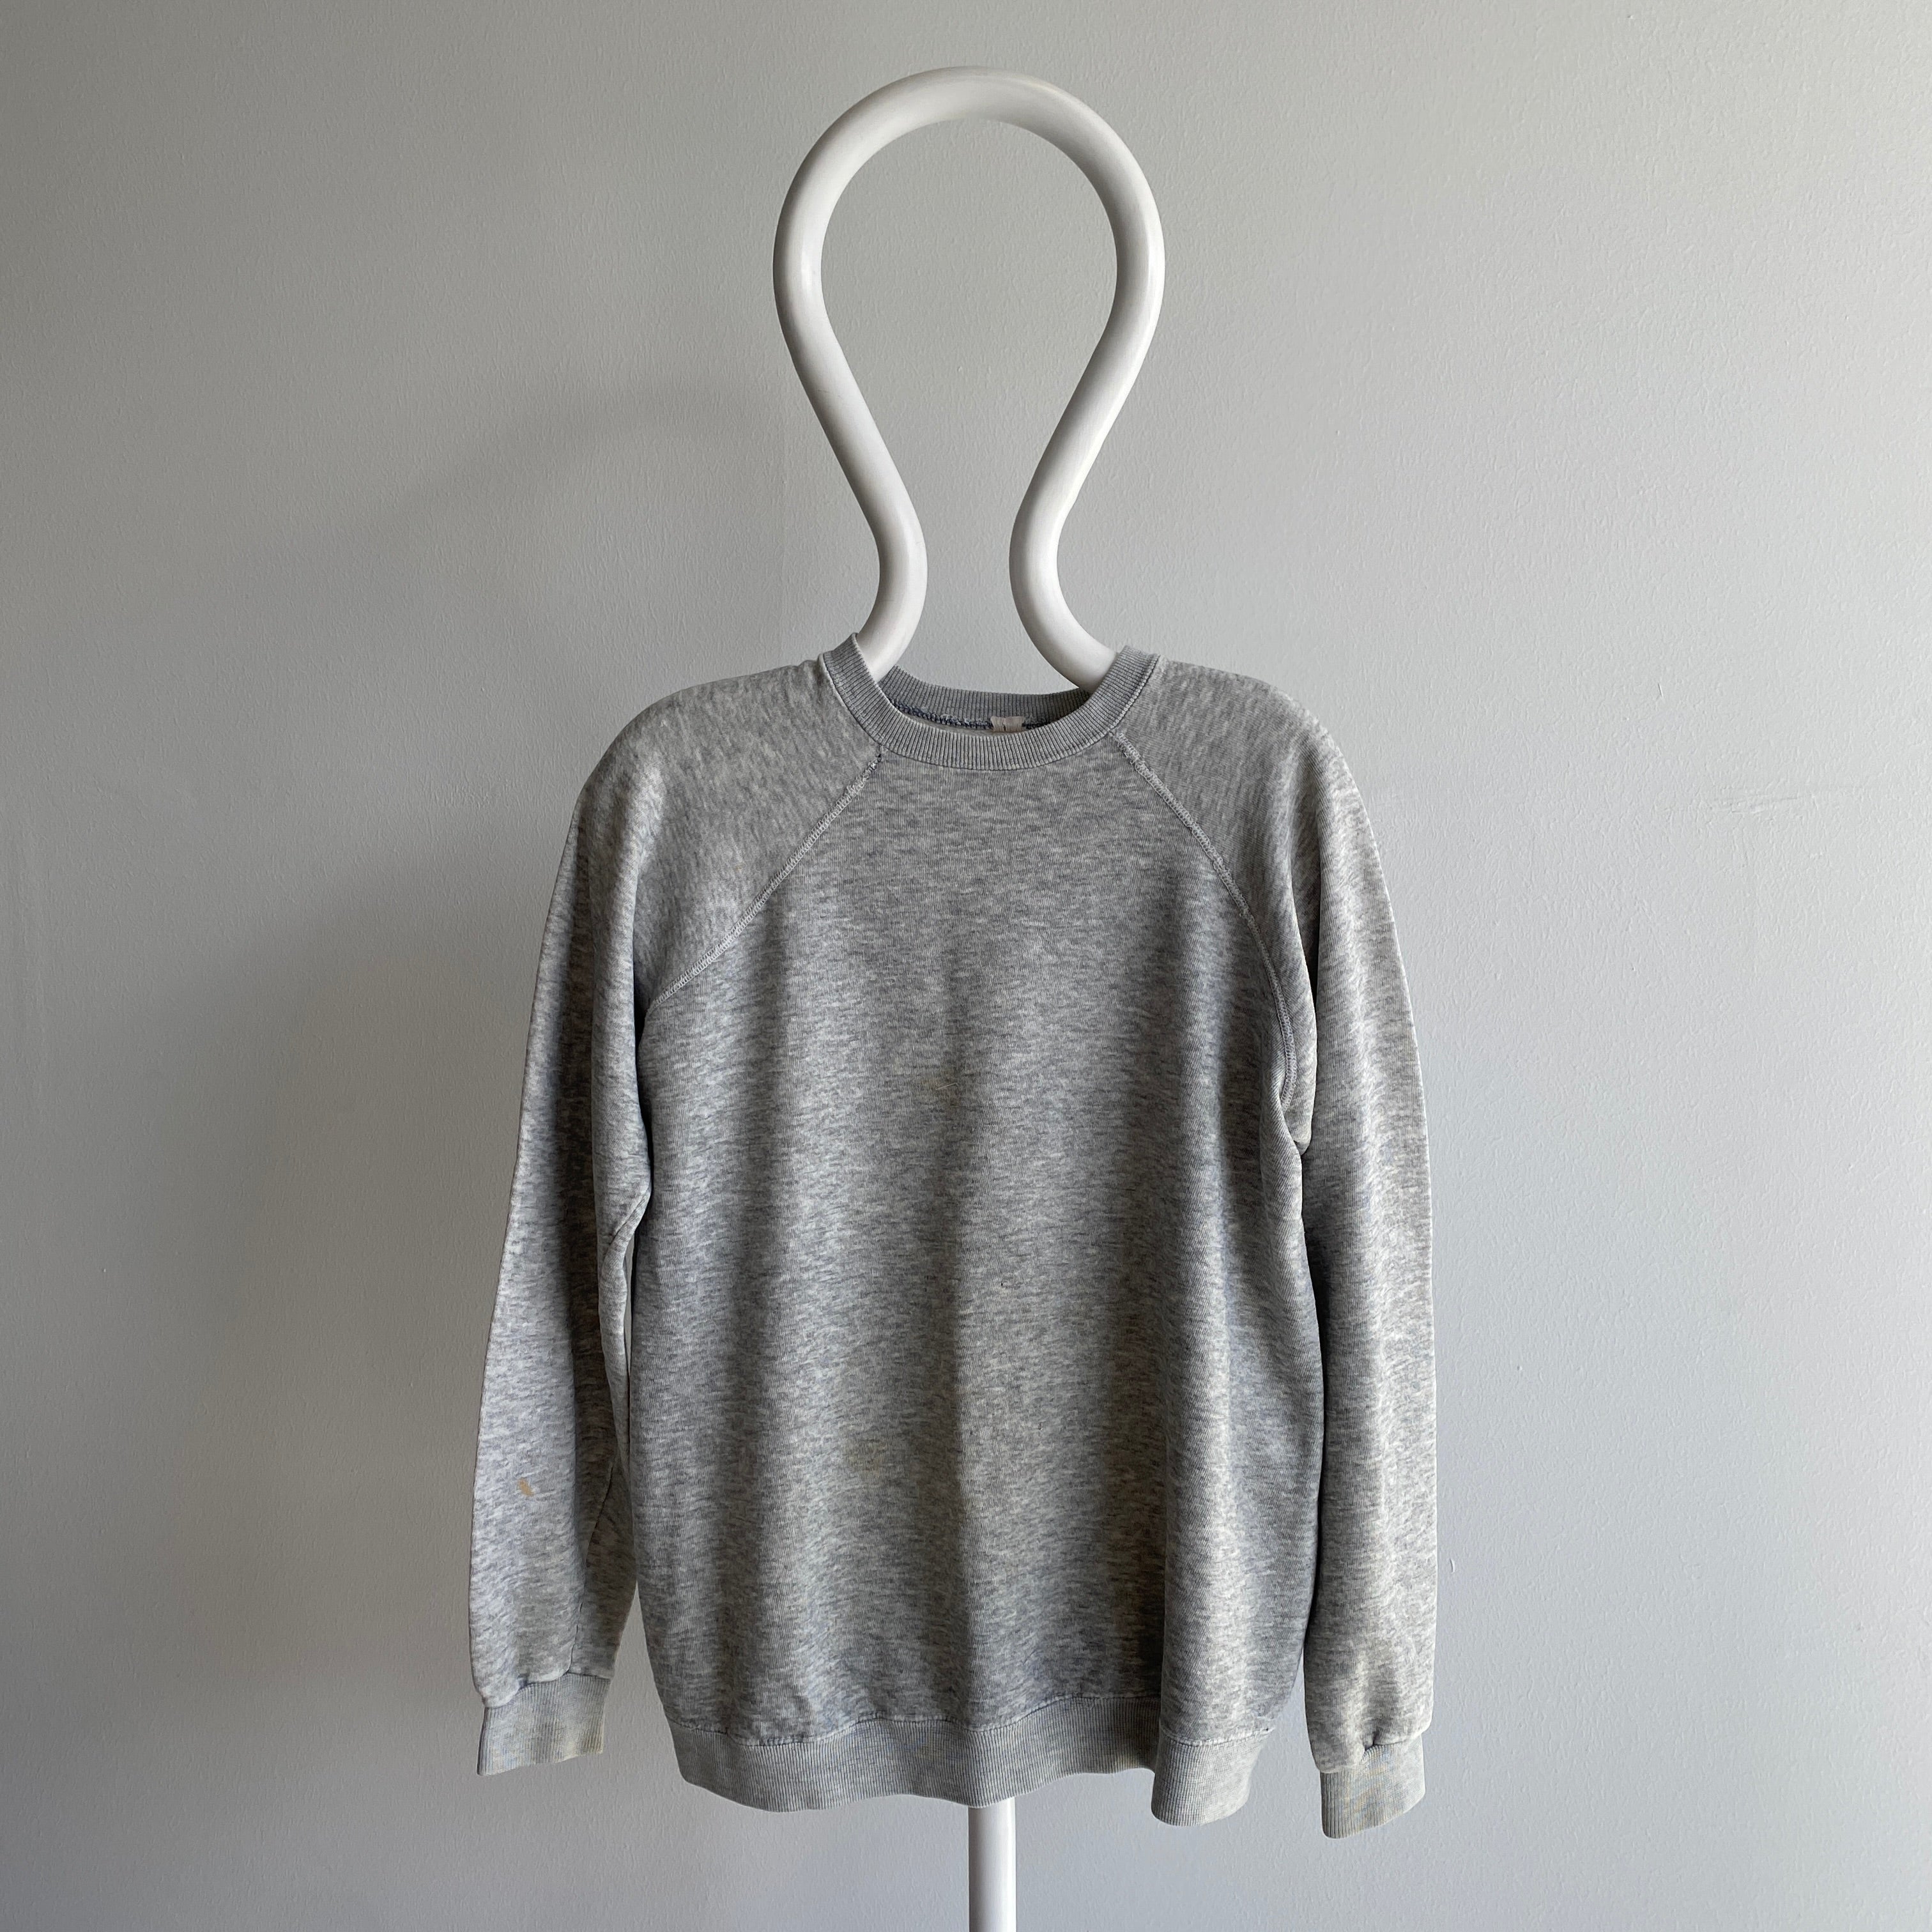 1970/80s Super Thrashed Mended Paper Thin Blank Grey Sweatshirt